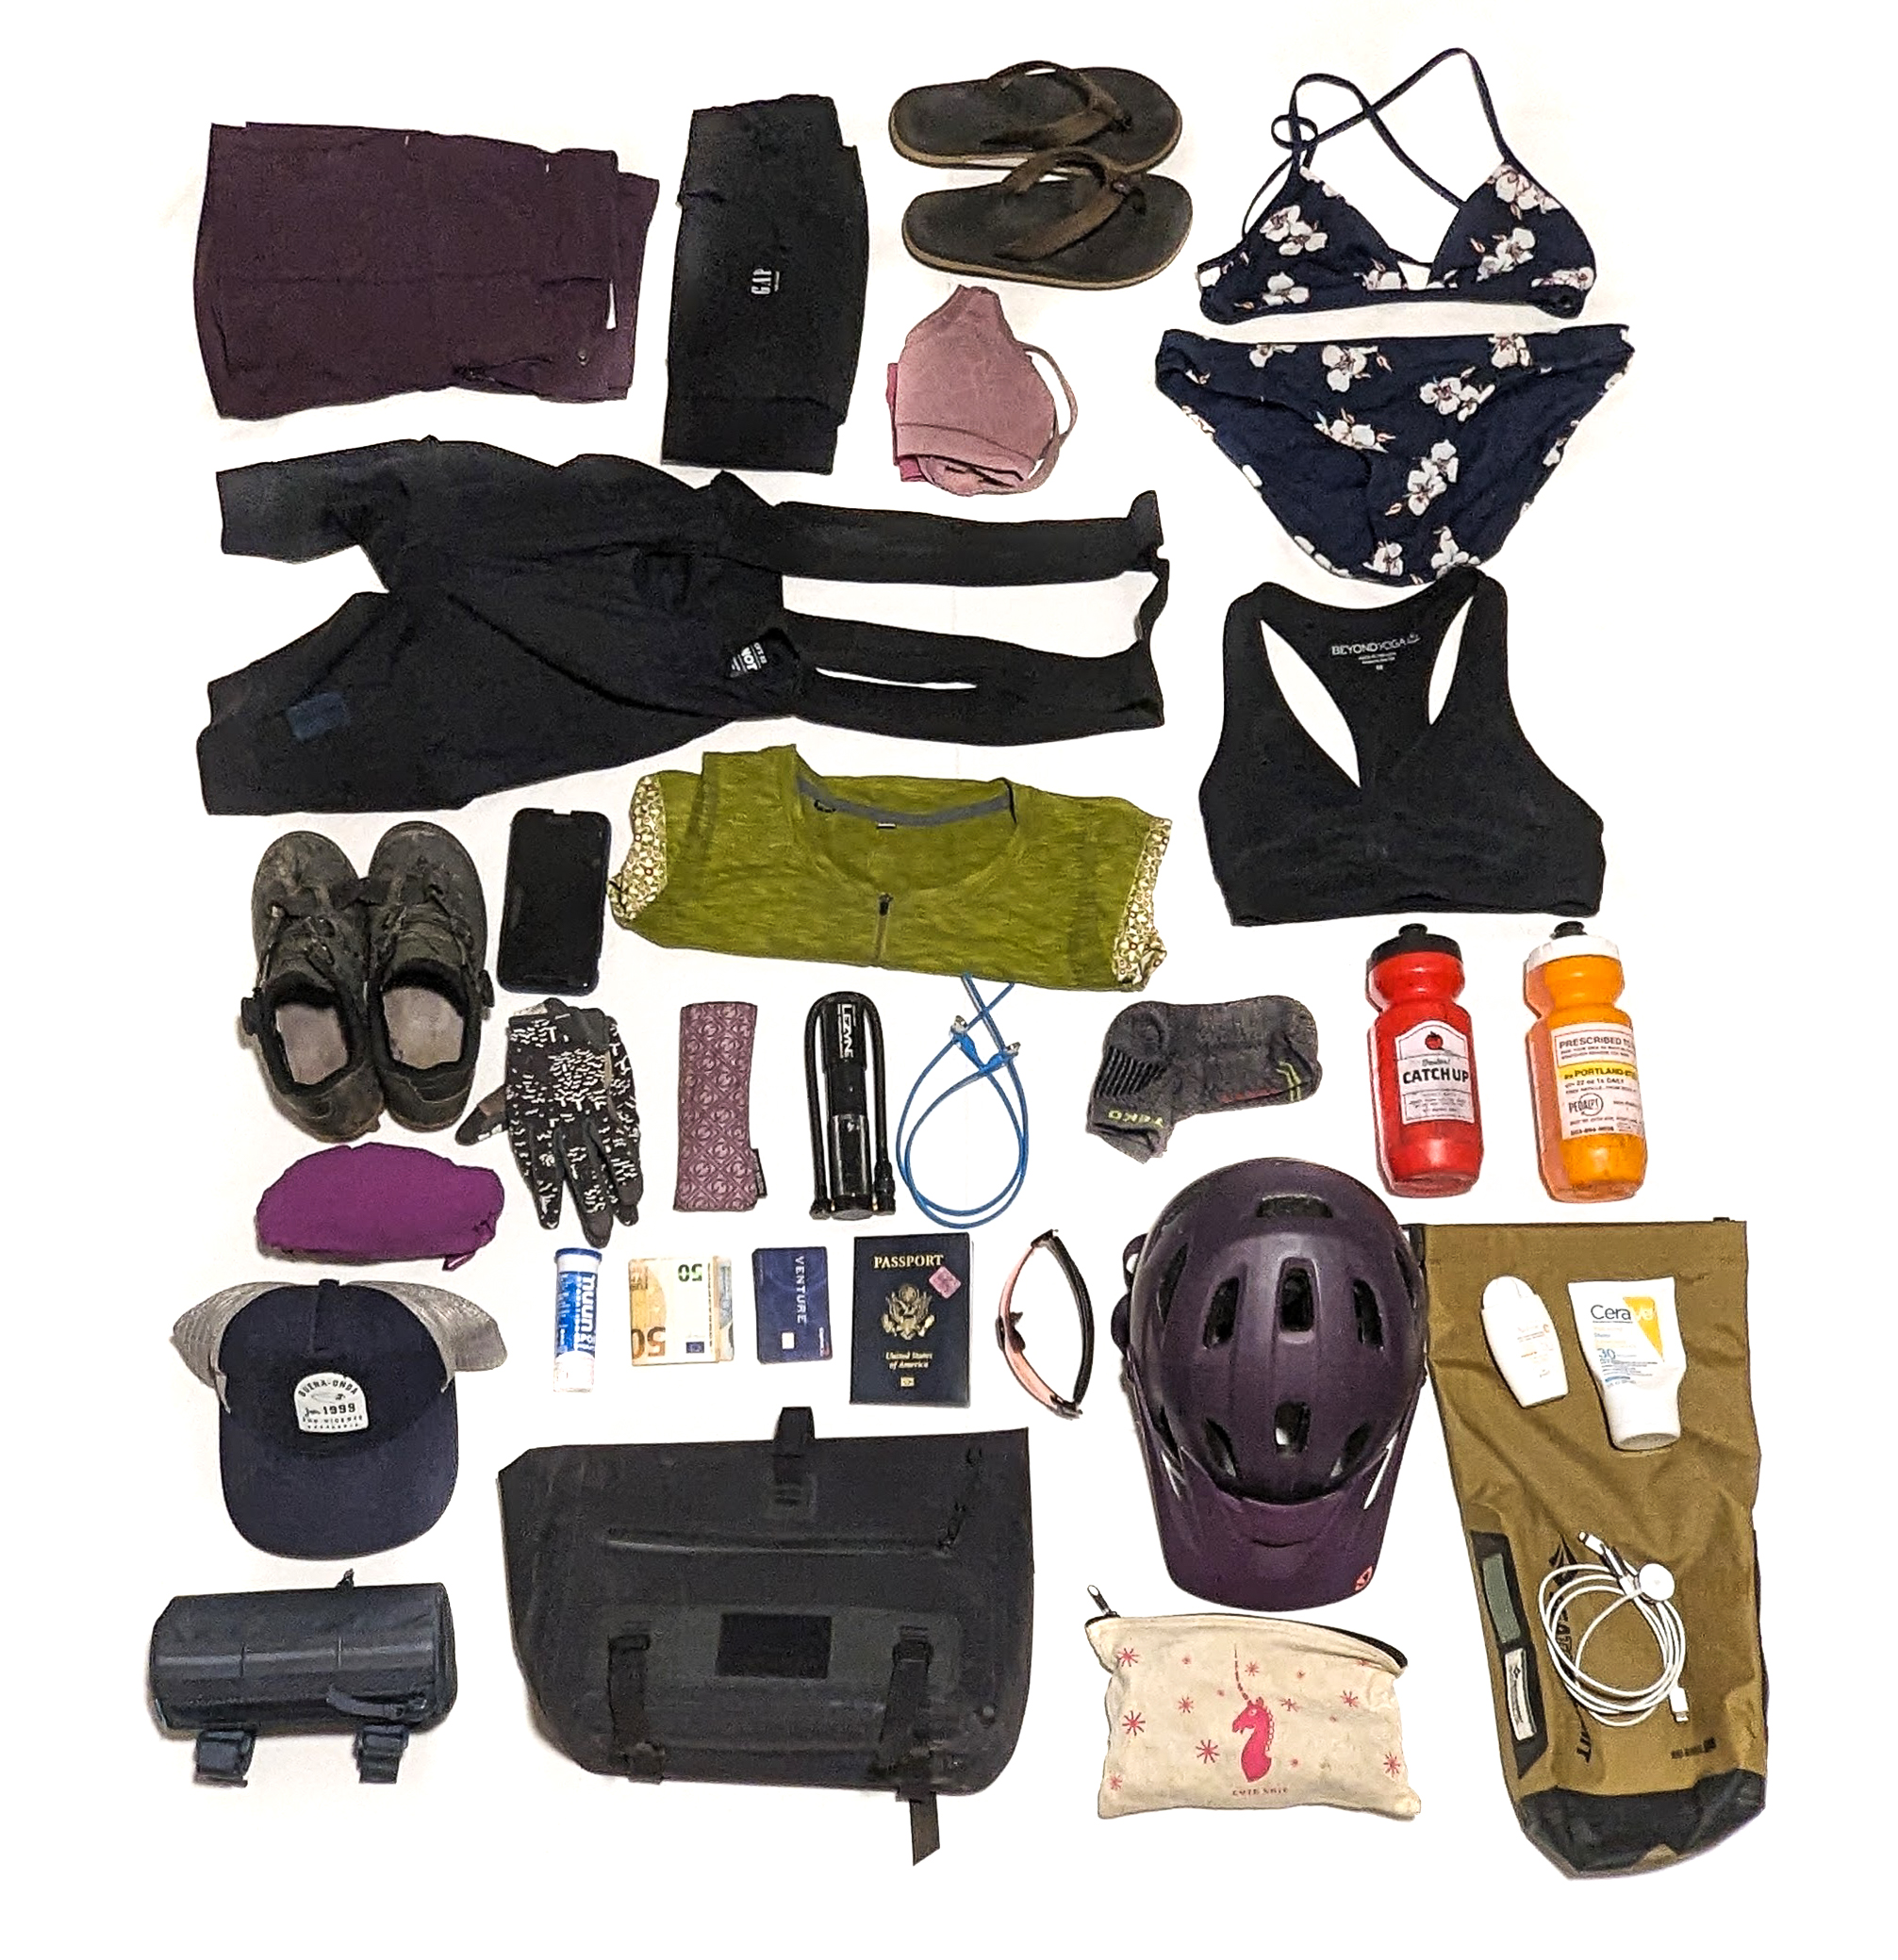 Katy's bikepacking gear the she rode with in Girona, Spain, laid out in a grid